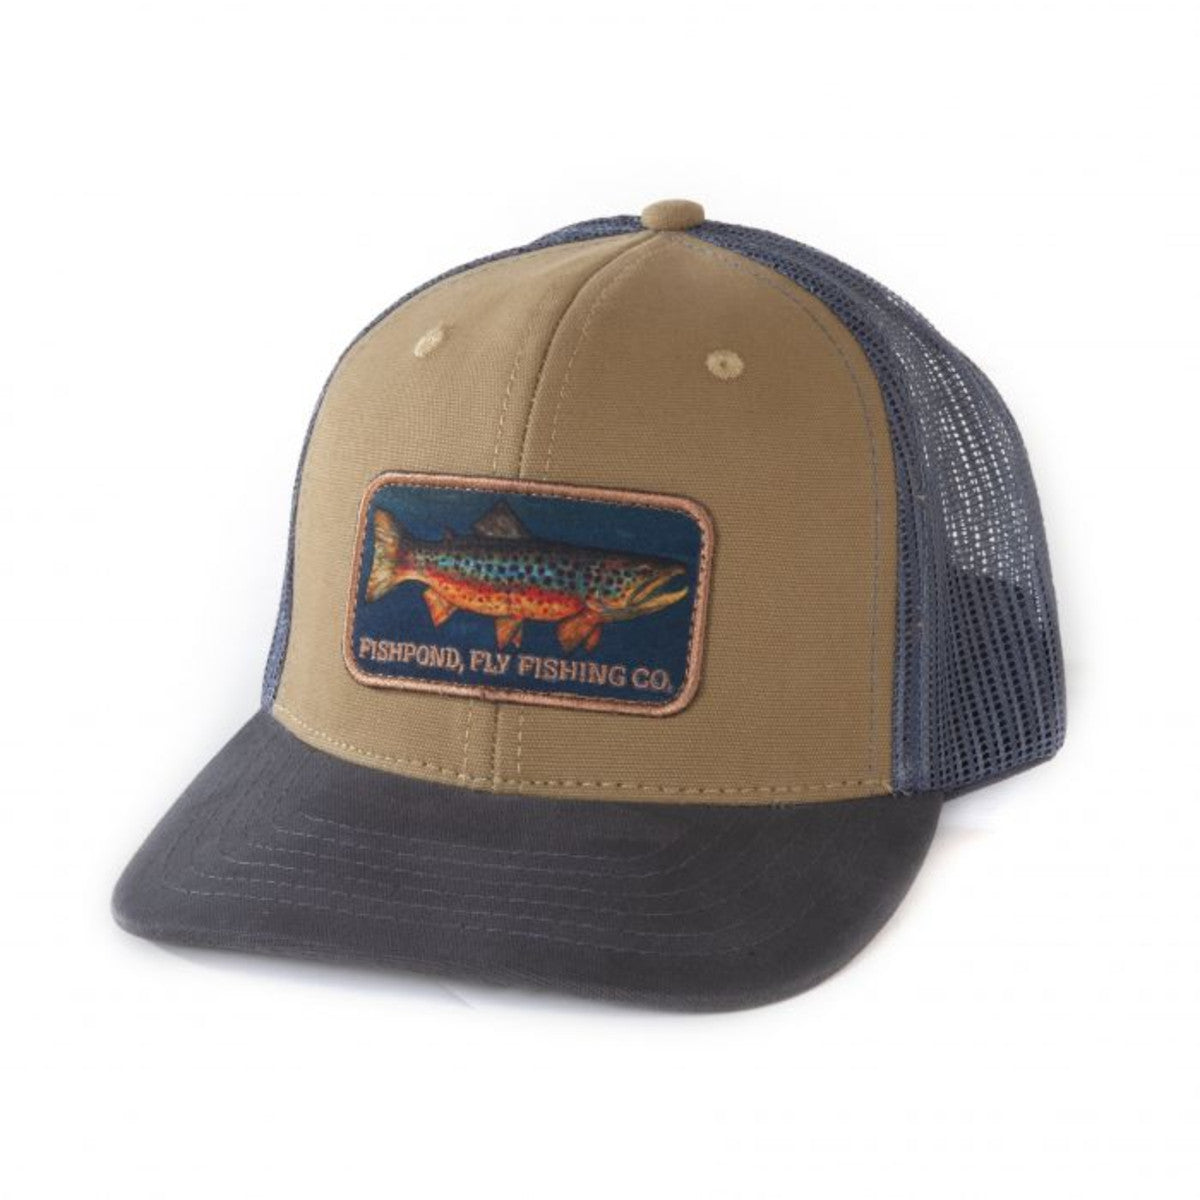 Fishpond-Local Hat